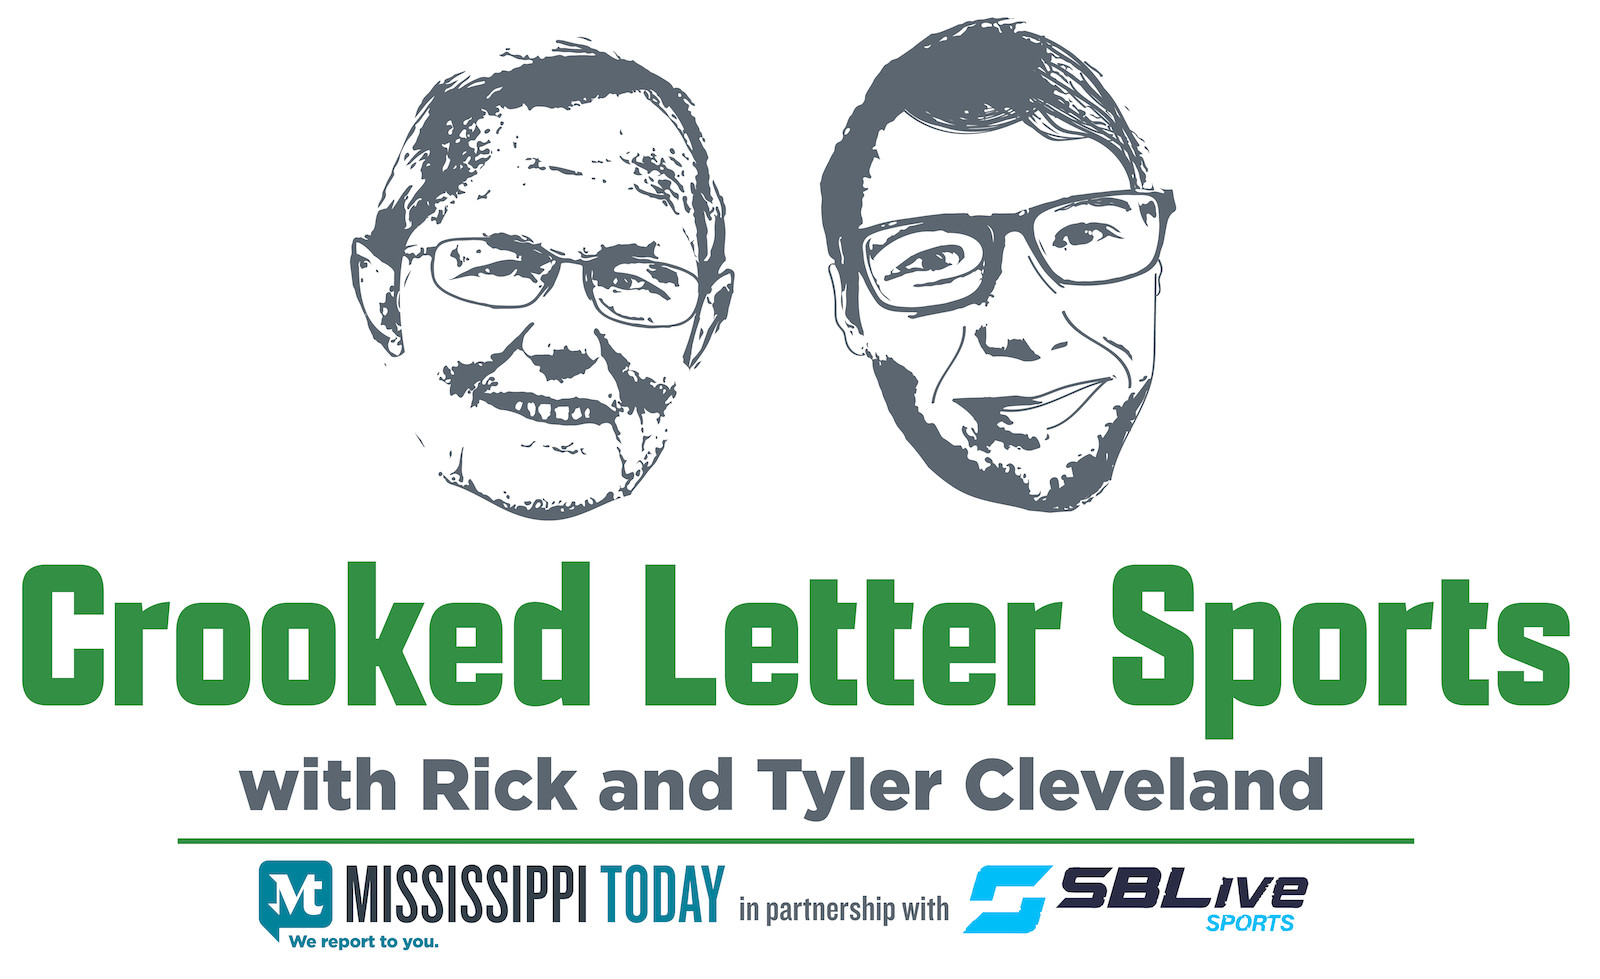 crooked letter sports podcast